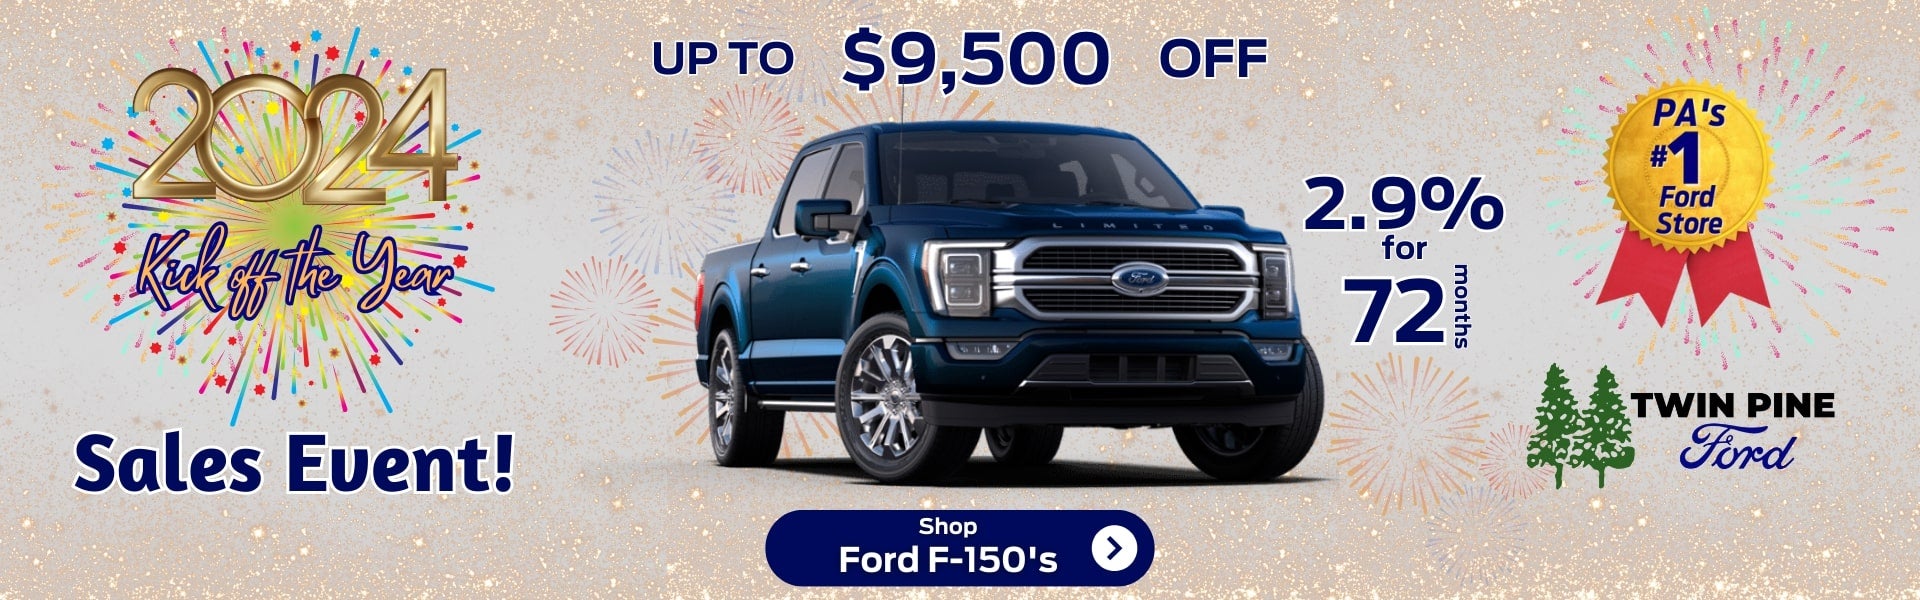 Up TO $9,500 OFF